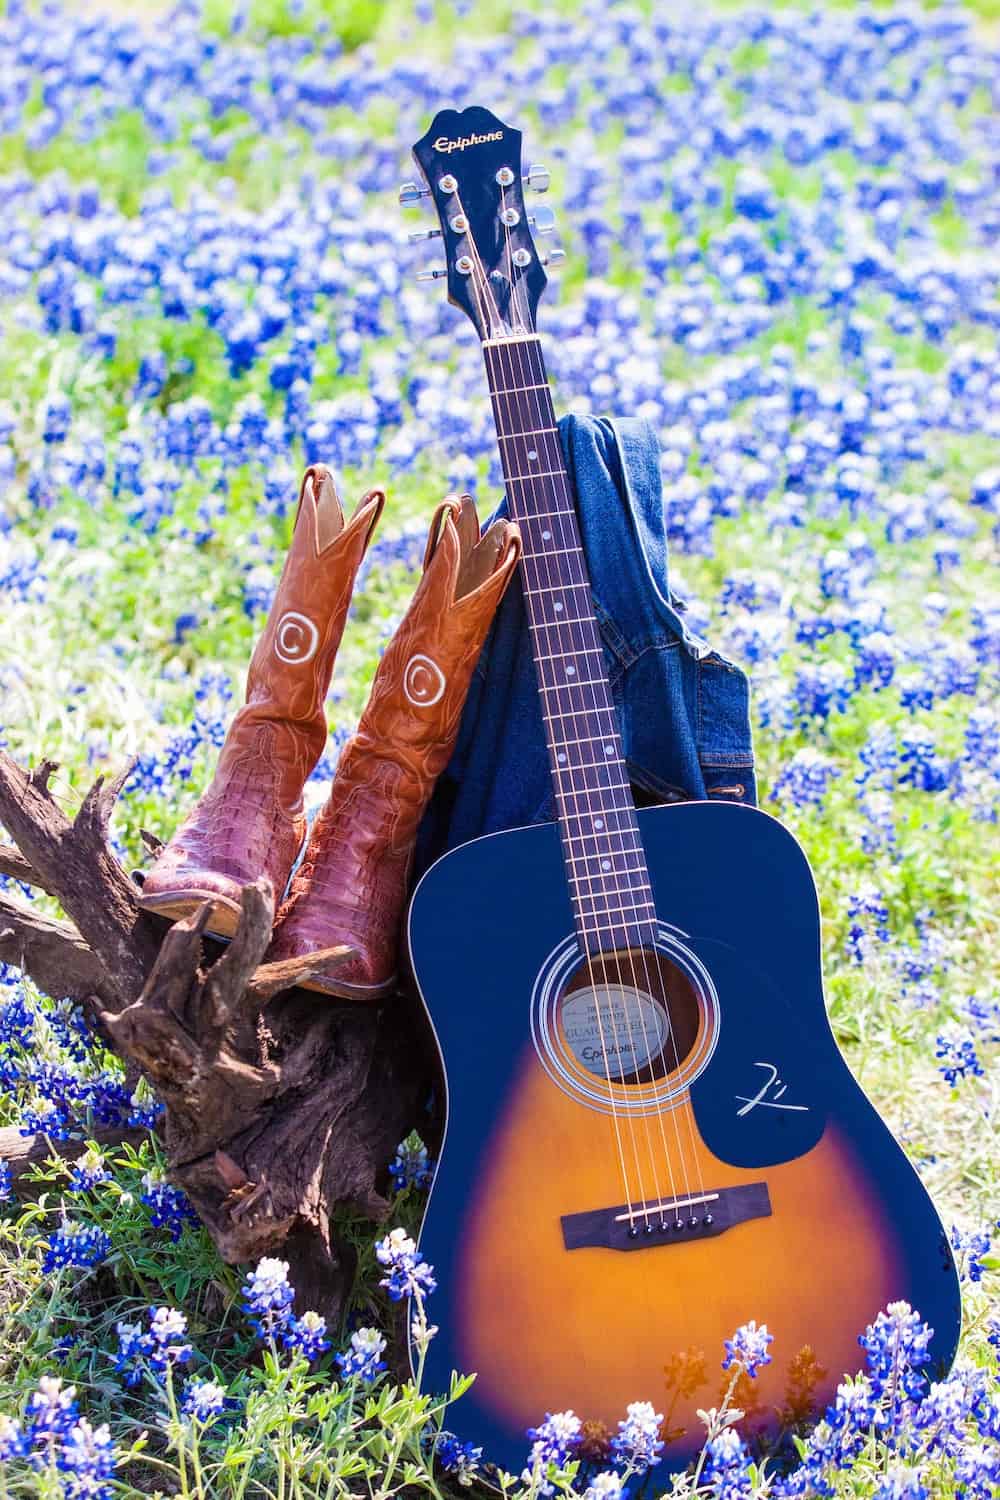 Daddy's Boots in Bluebonnets